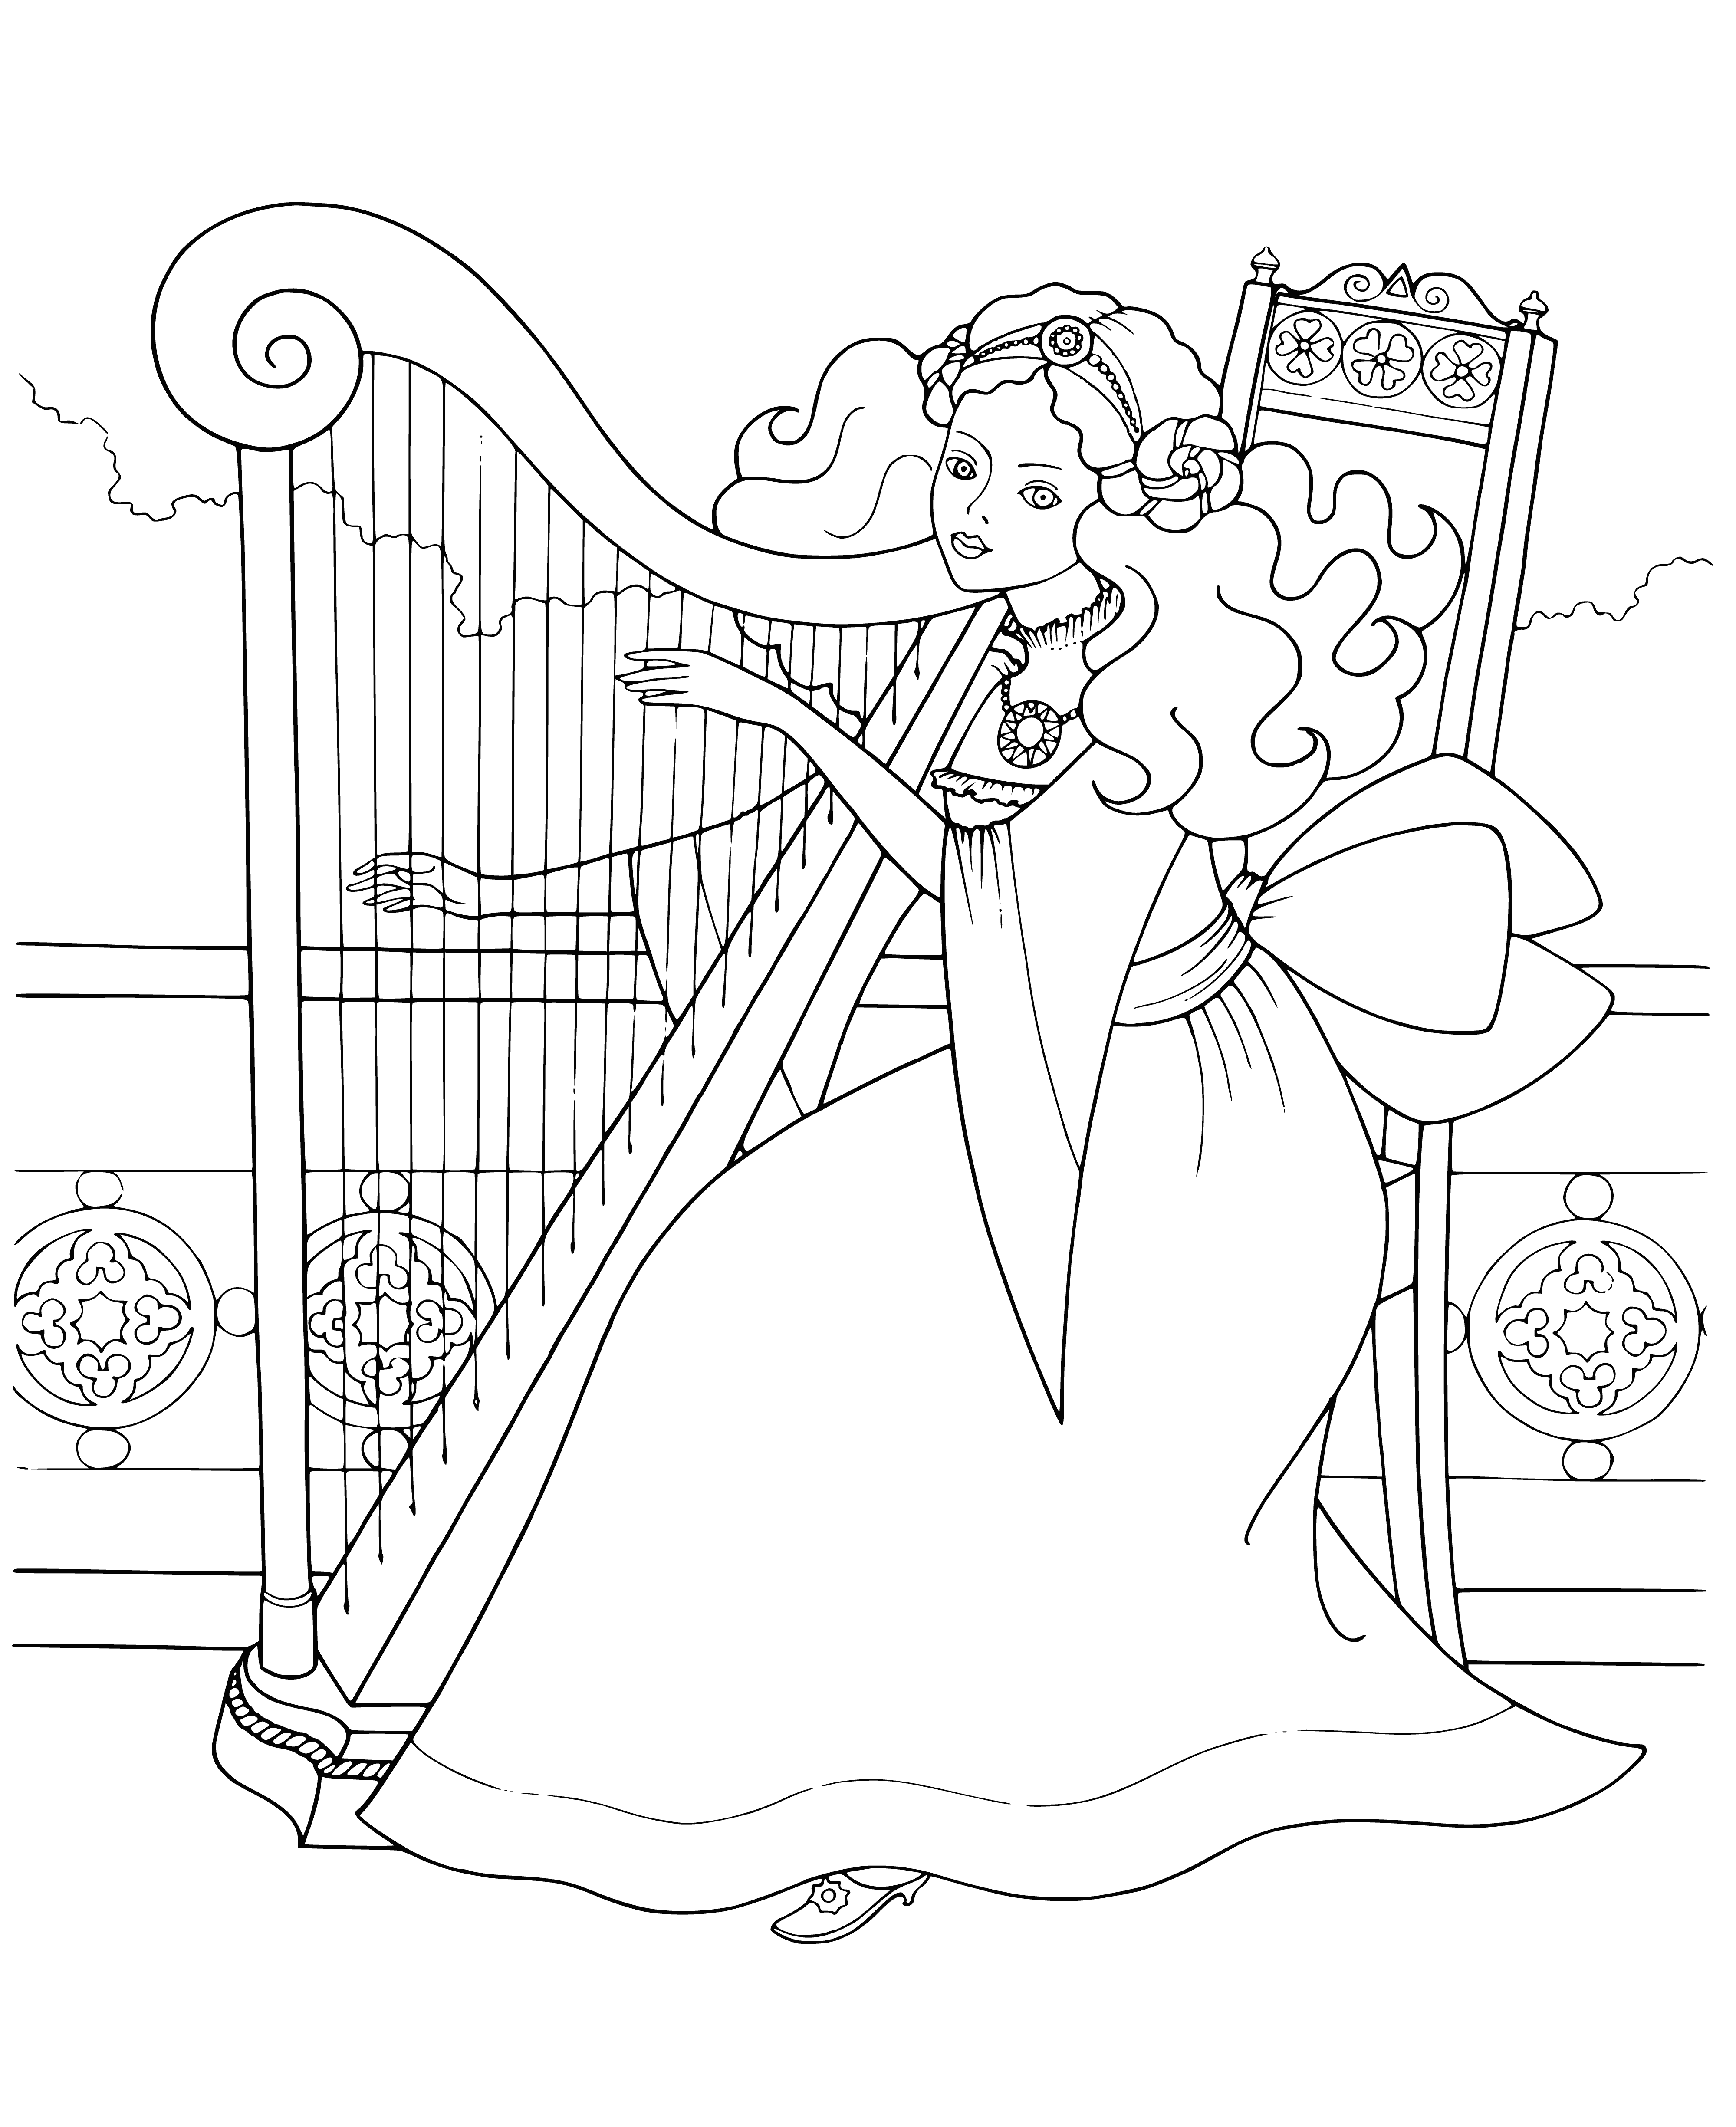 Harp playing coloring page